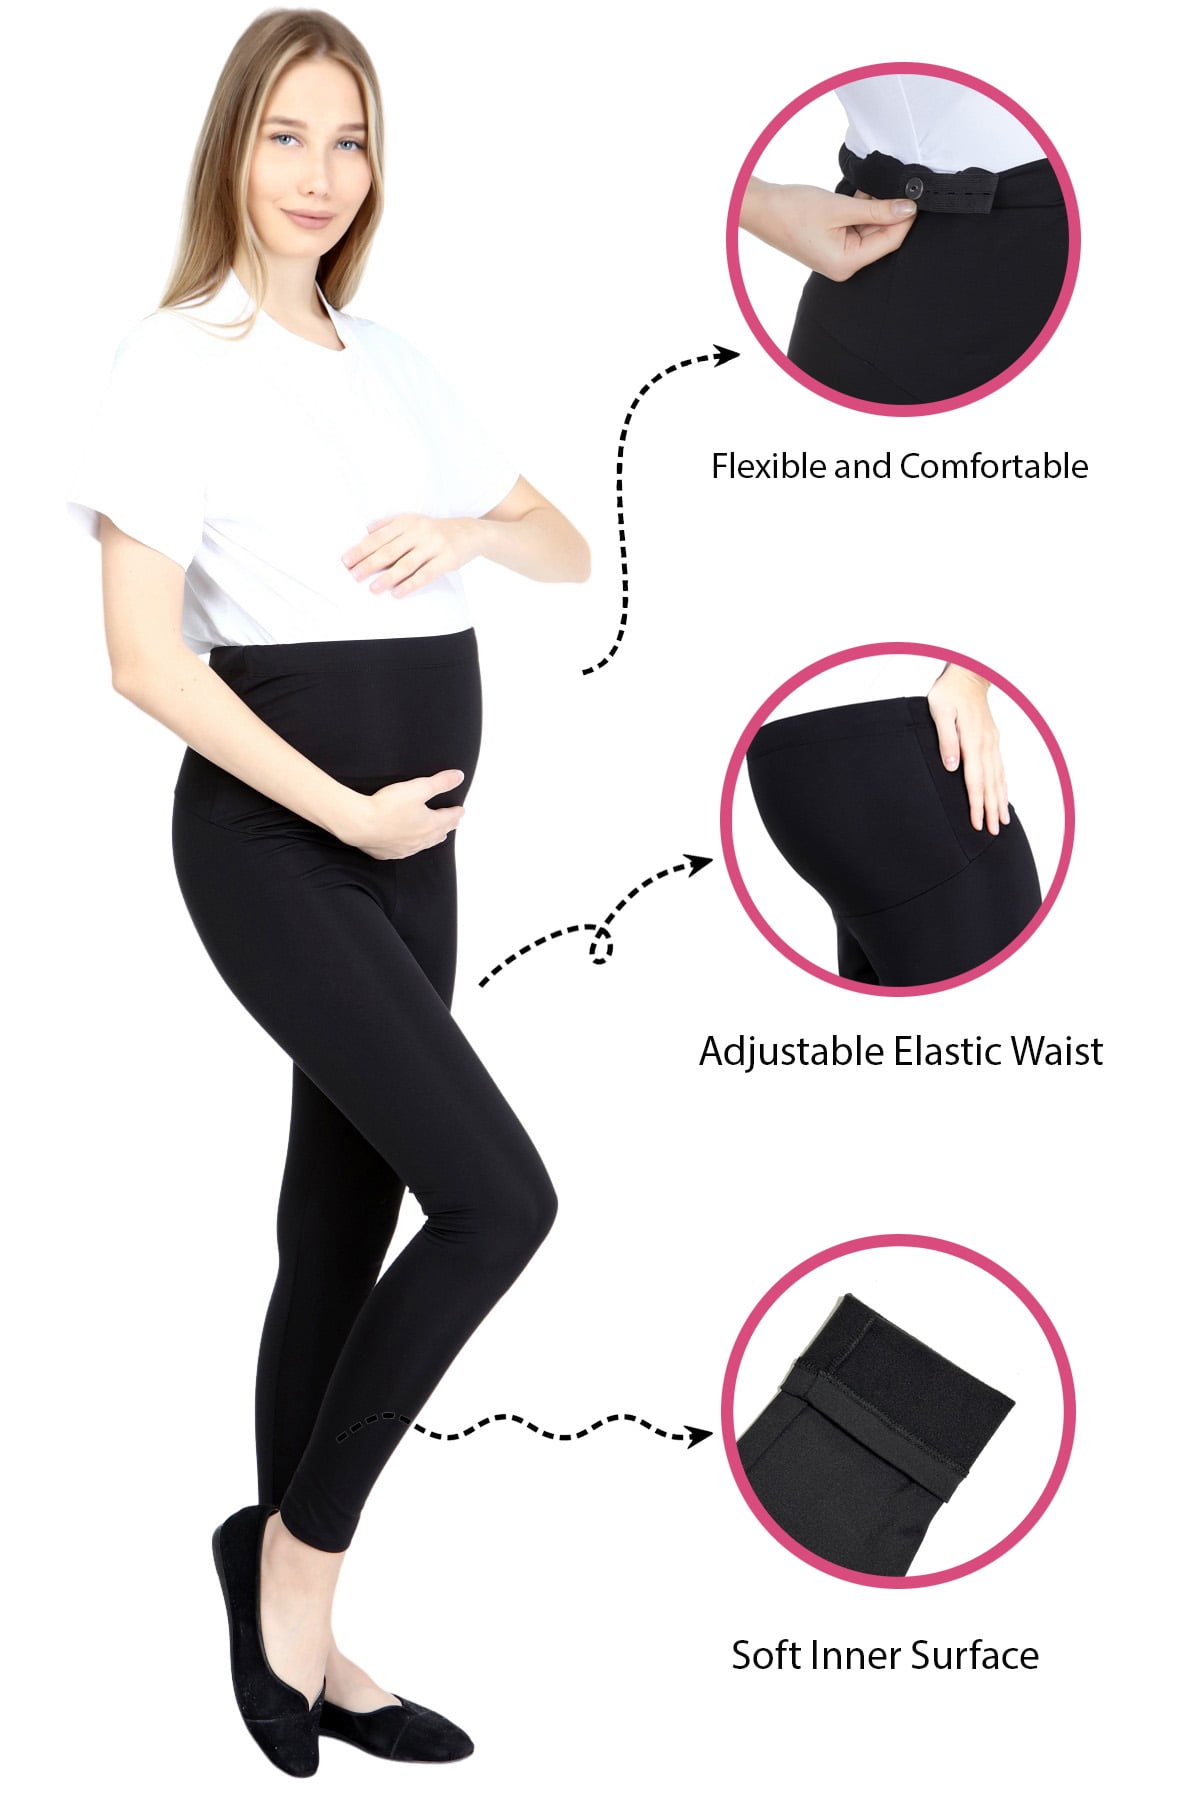 LVMA8060 - Luvmabelly Thermal Bottom Stretchy Maternity Long Leggings keeps  you warm